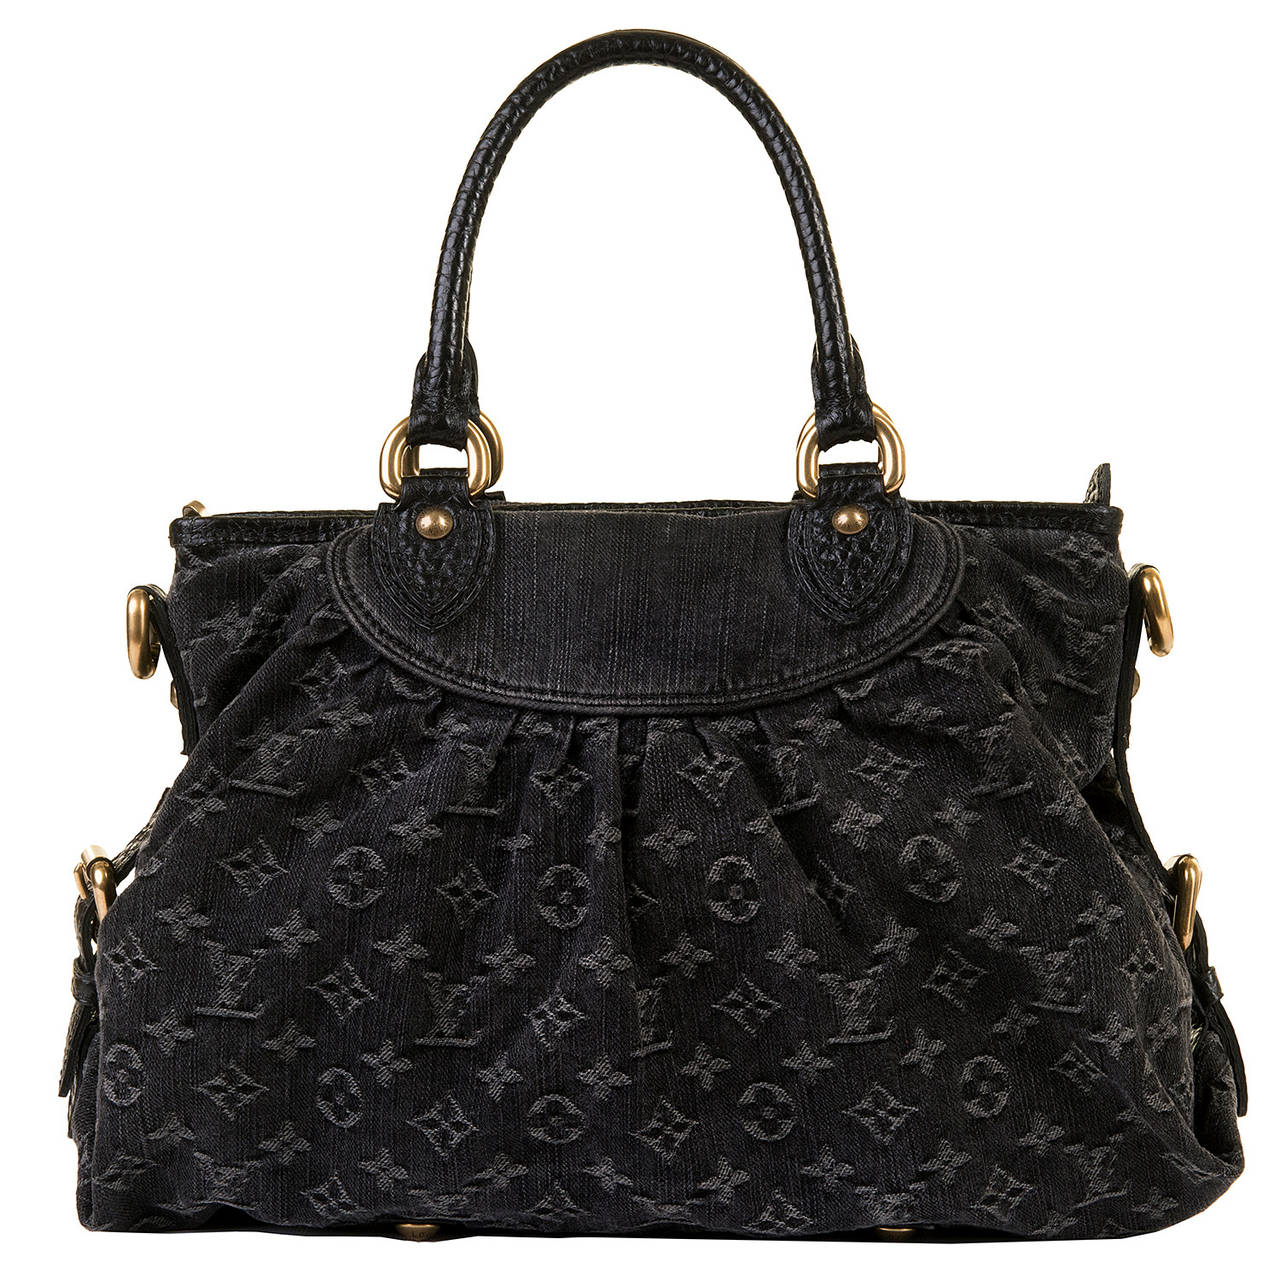 This much sought-after Louis Vuitton Bag has a detachable shoulder strap and can be worn as a shoulder or handbag. In 'As New' condition, the bag comes with it's original dust sack. Finished in black monogrammed denim with gold tone hardware this